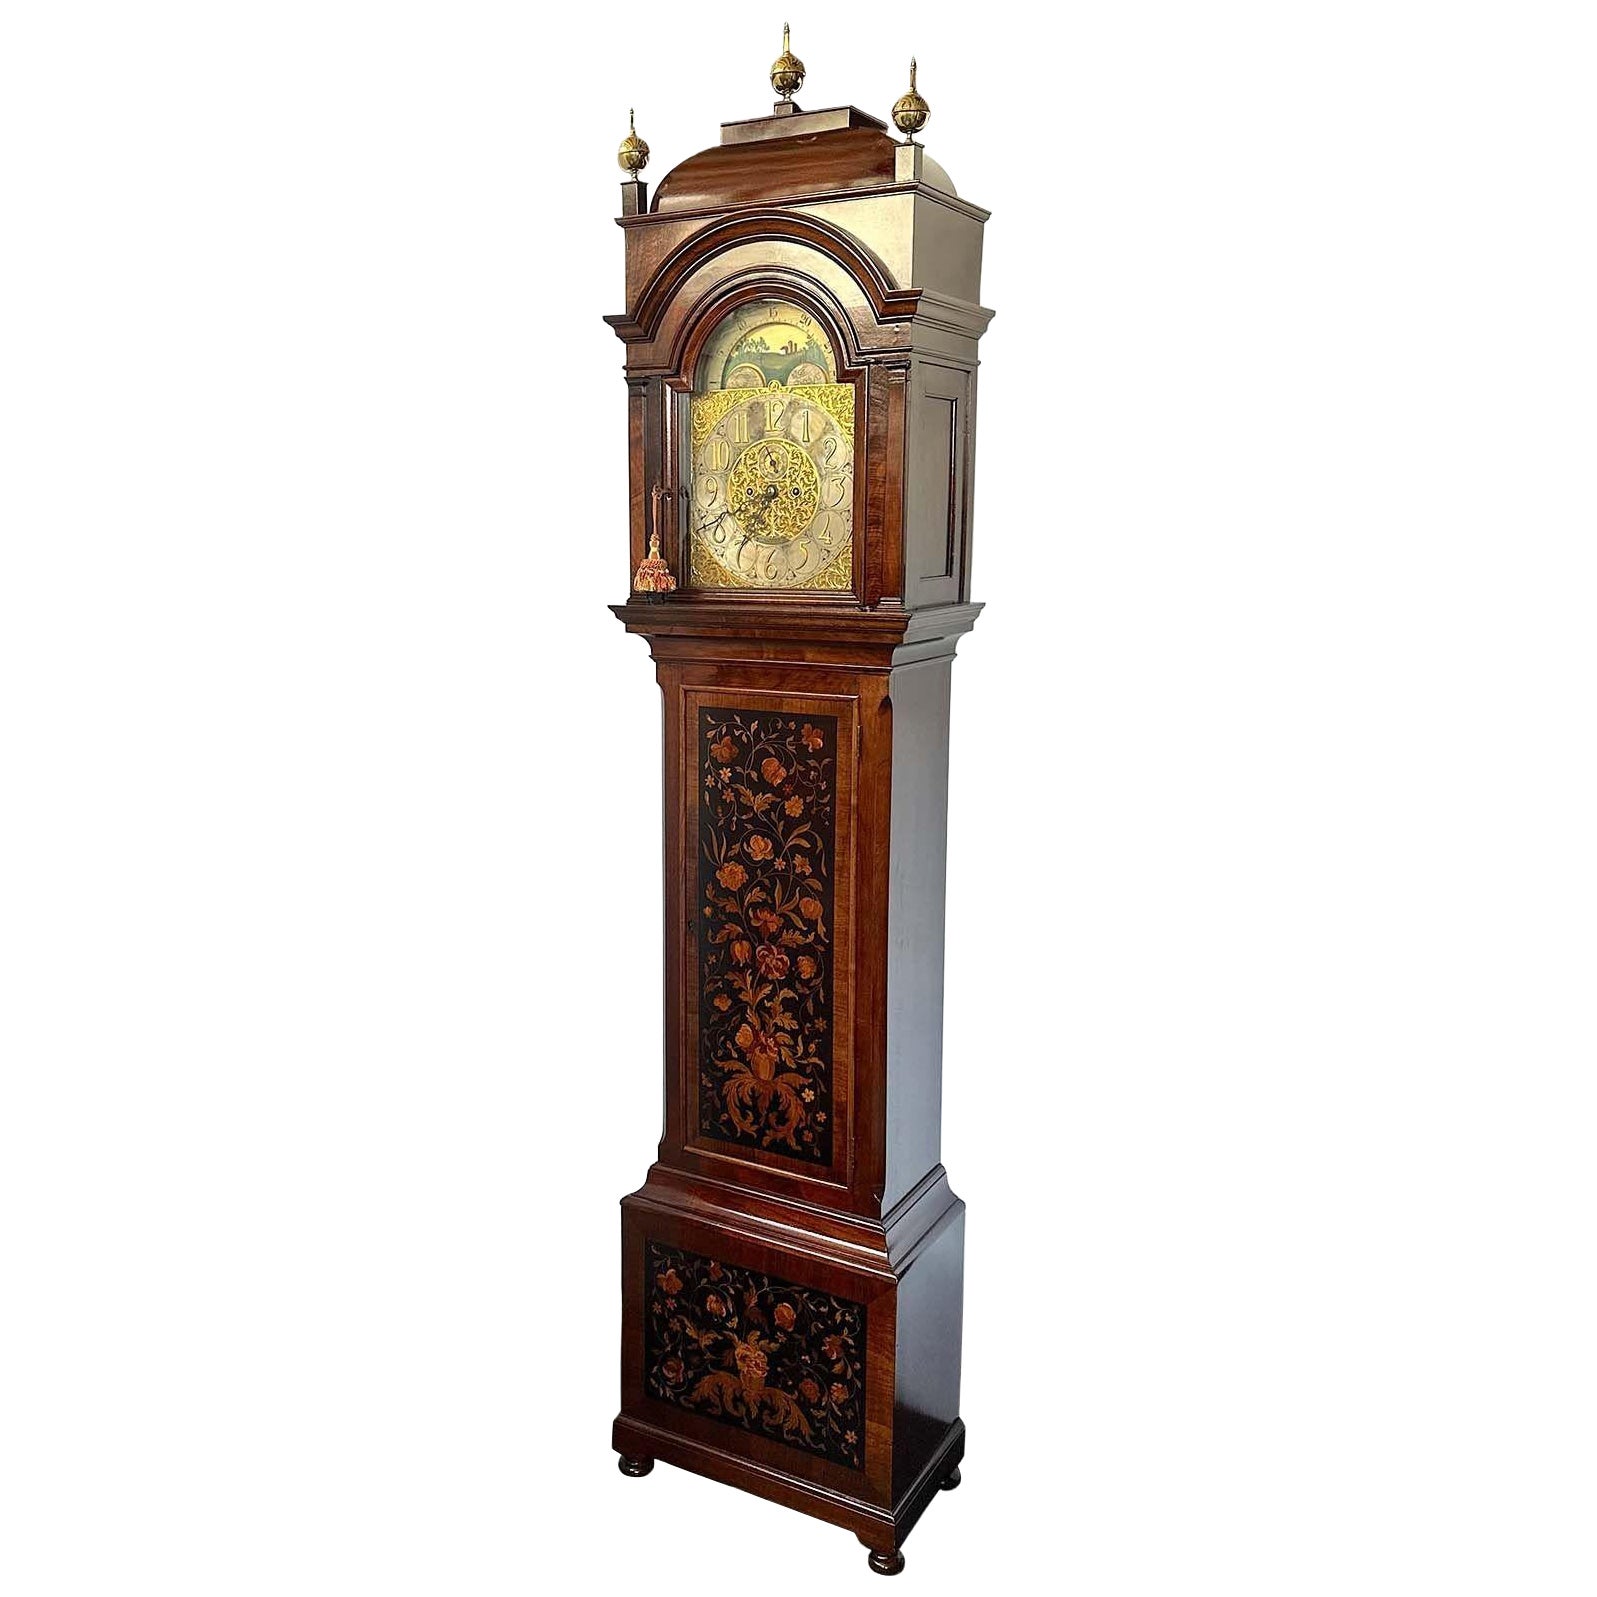 How do I read a moon dial on a grandfather clock?